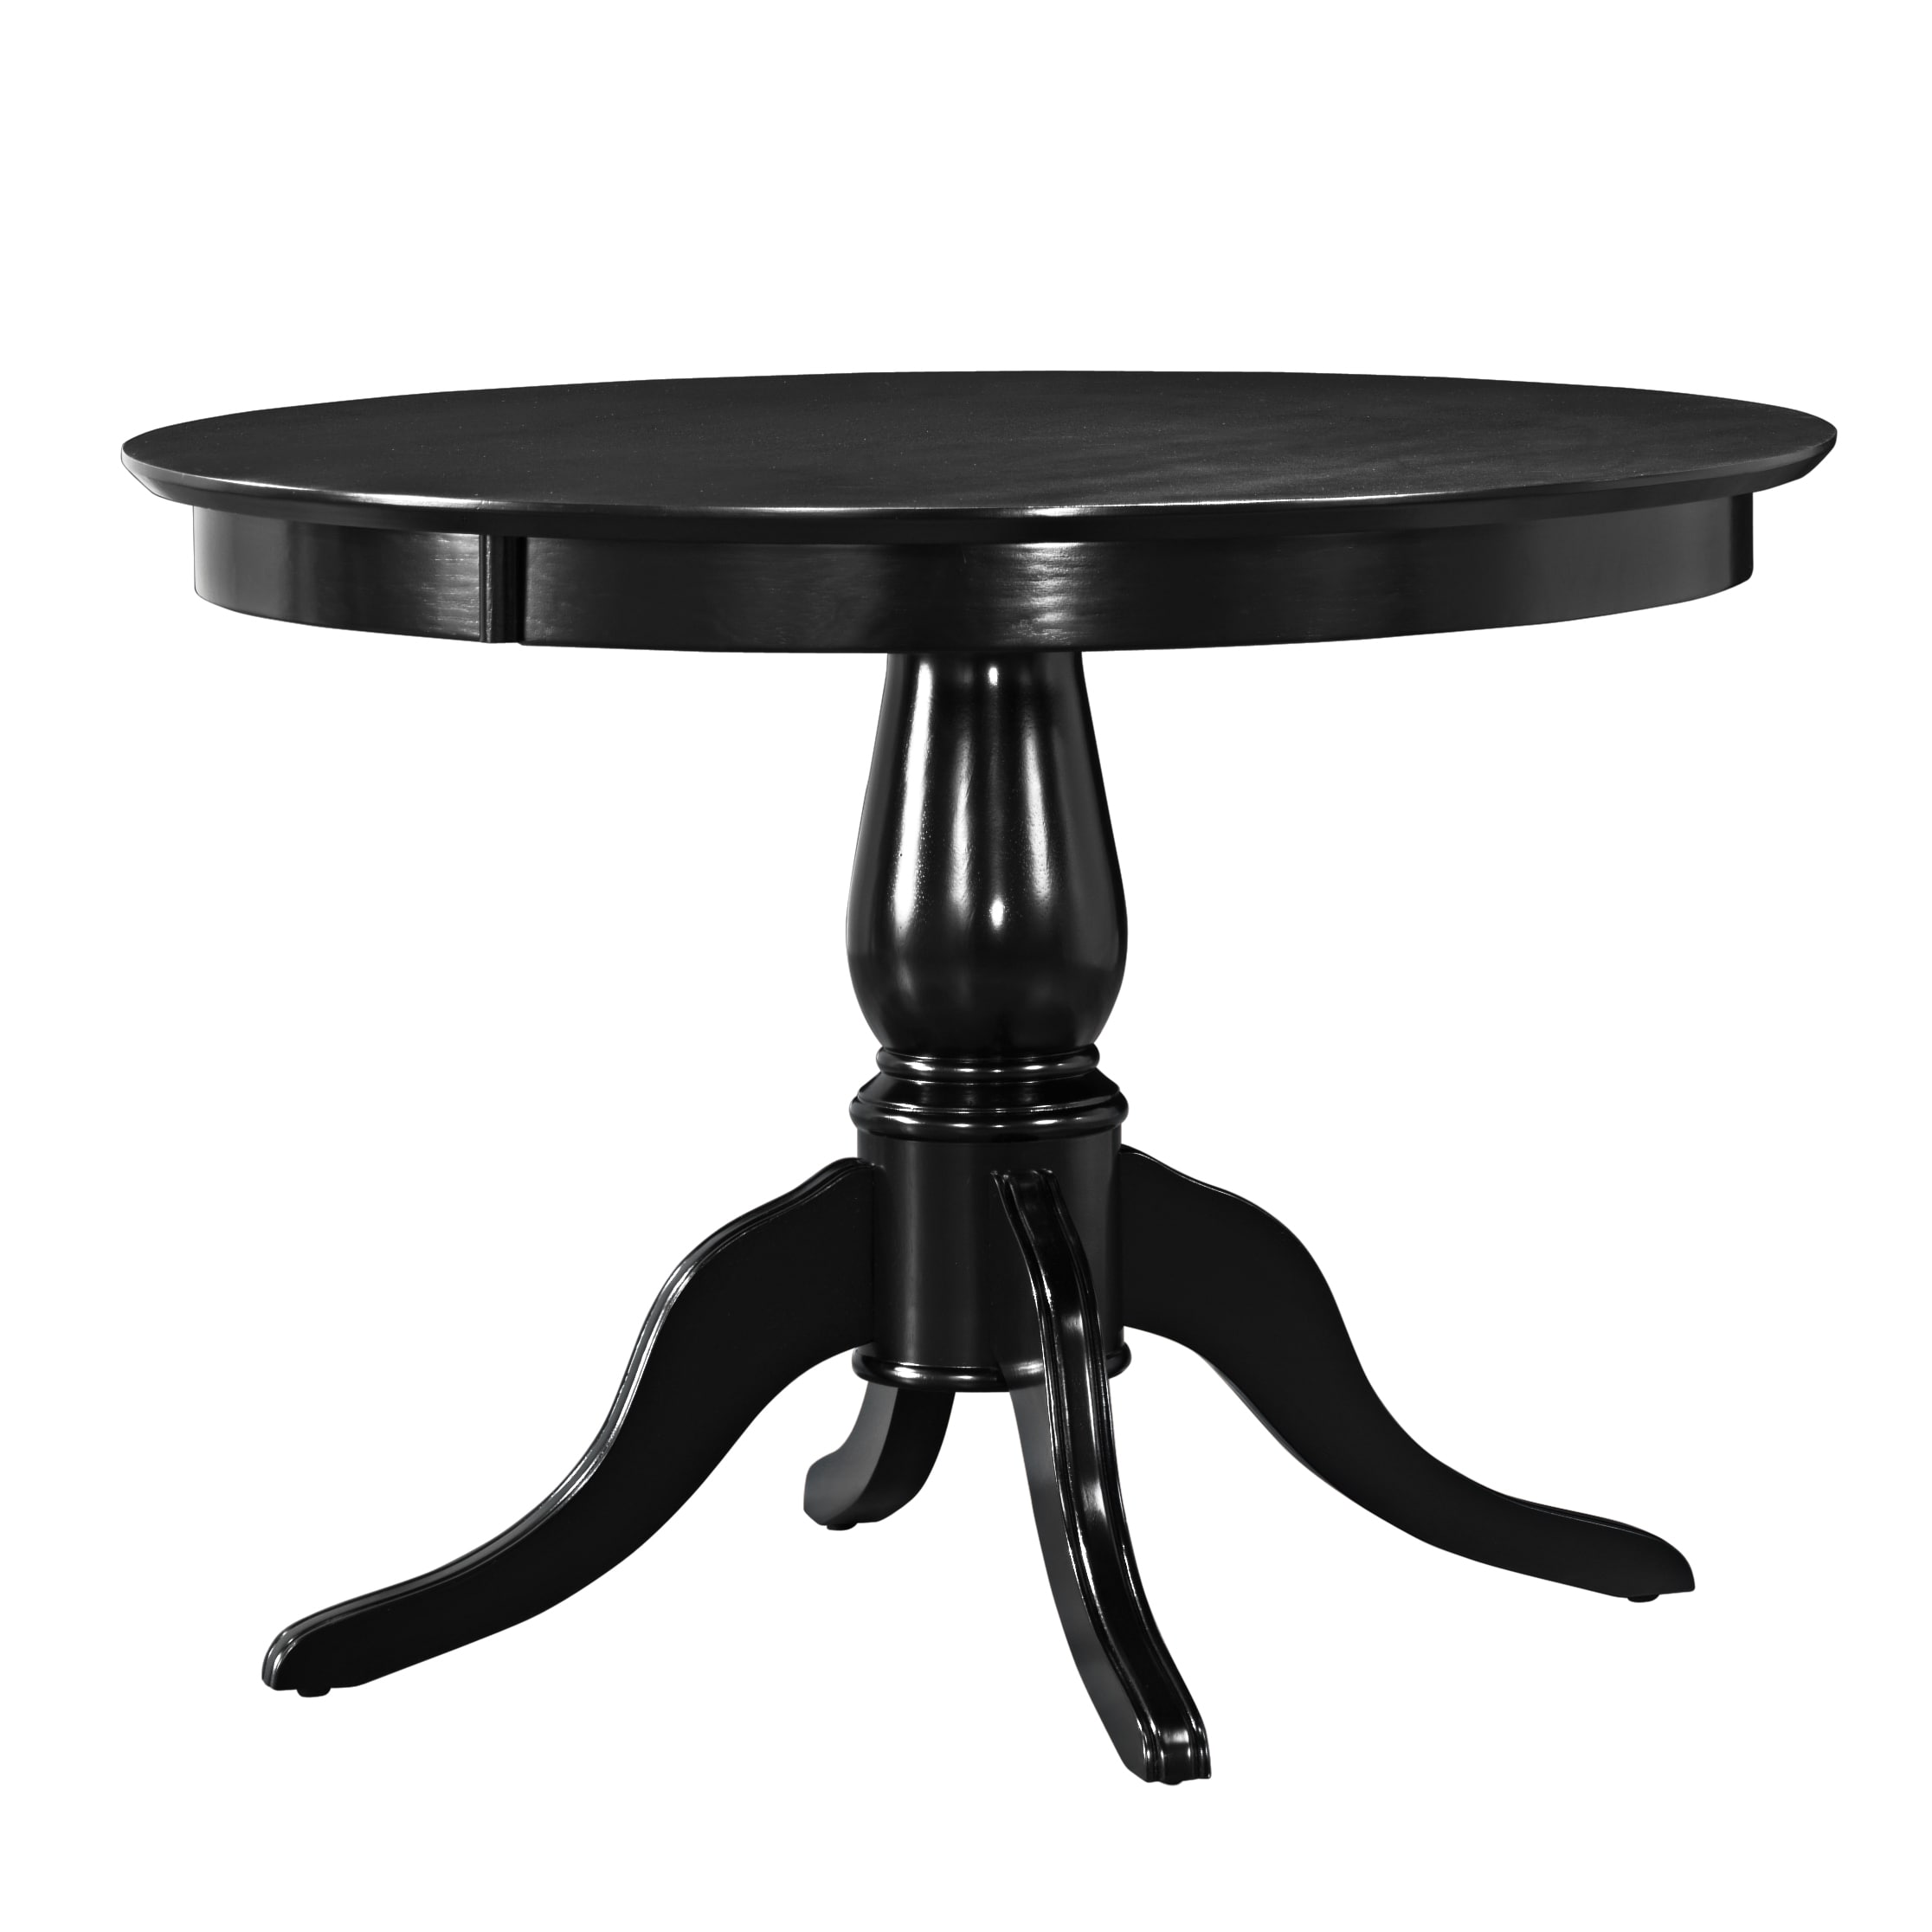 Calais Black Round Dining Table - Overstock Shopping - Great Deals on